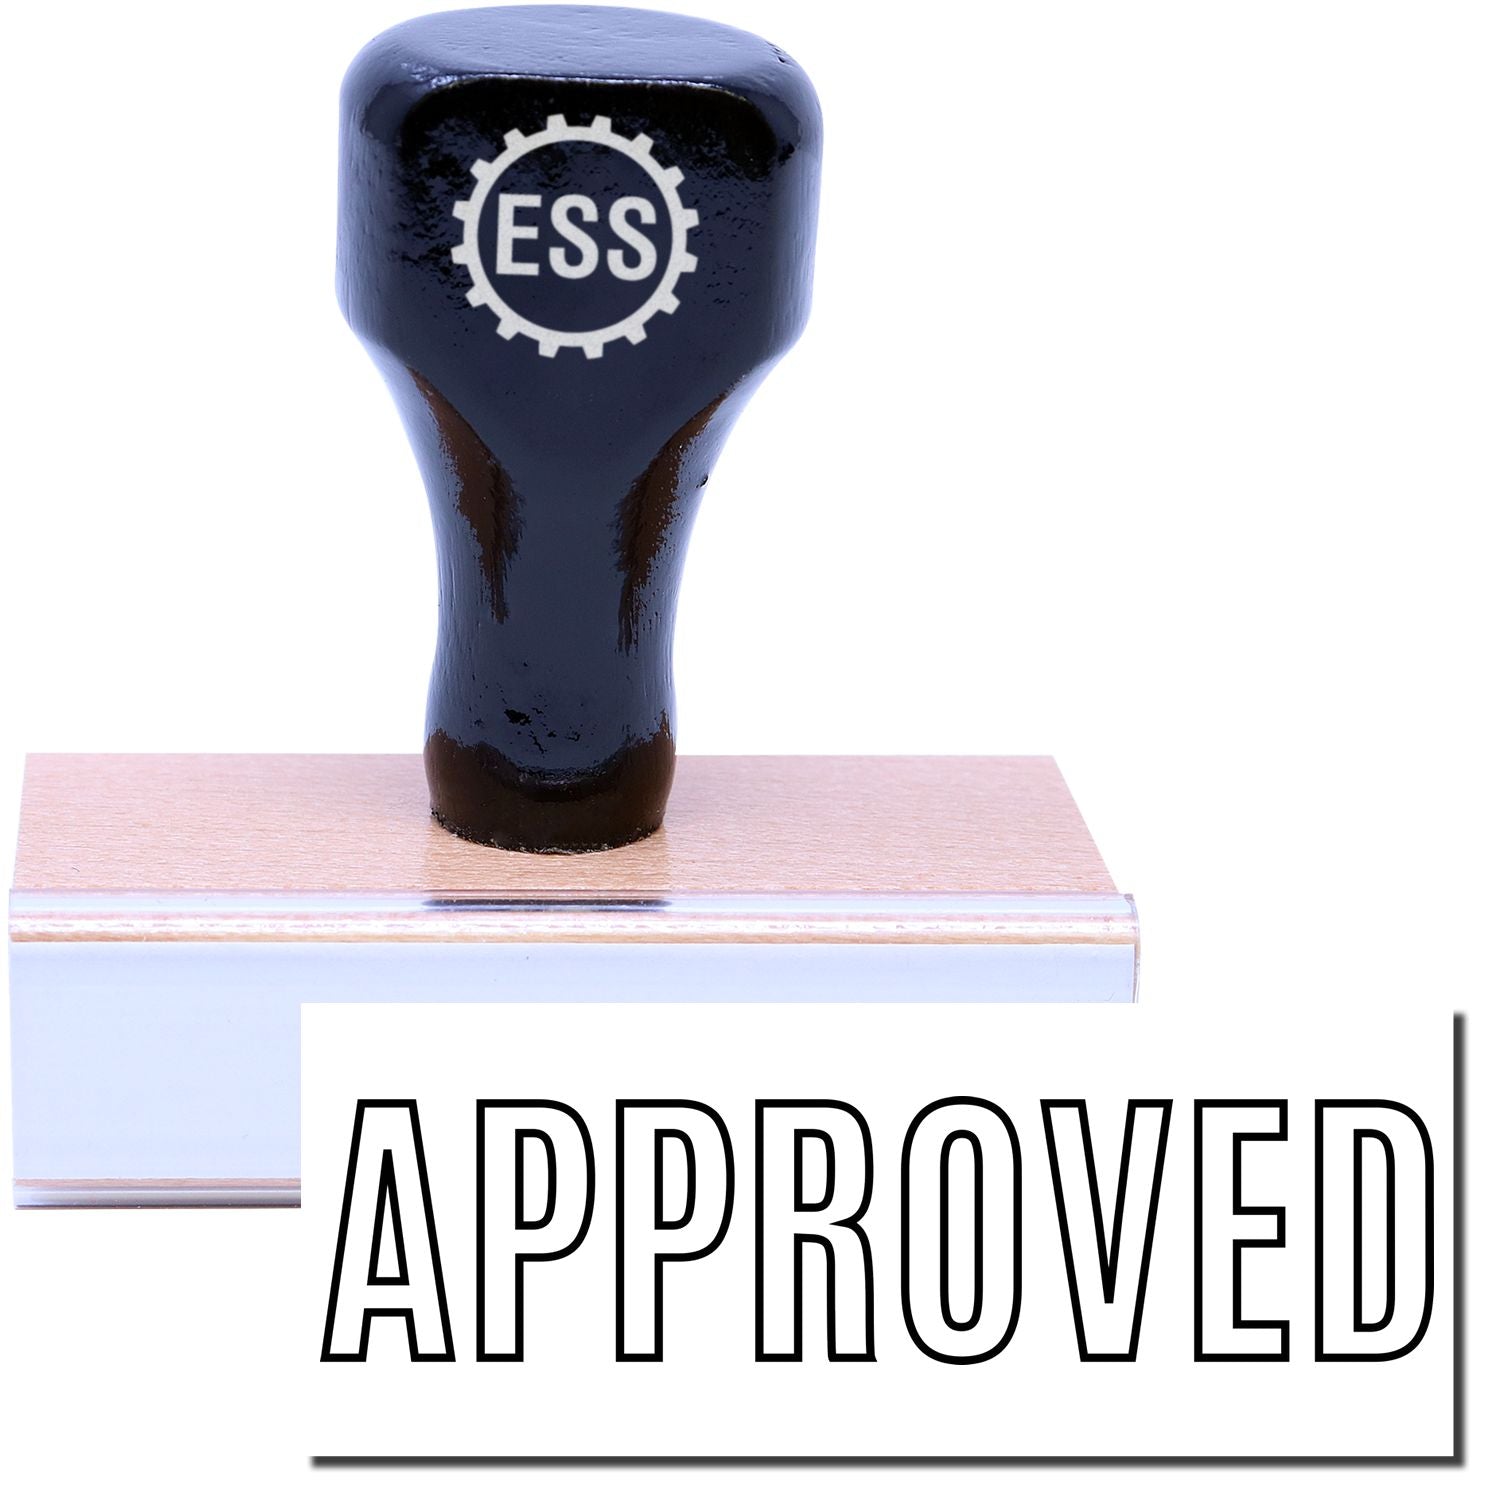 A stock office rubber stamp with a stamped image showing how the text "APPROVED" in a large outline font is displayed after stamping.